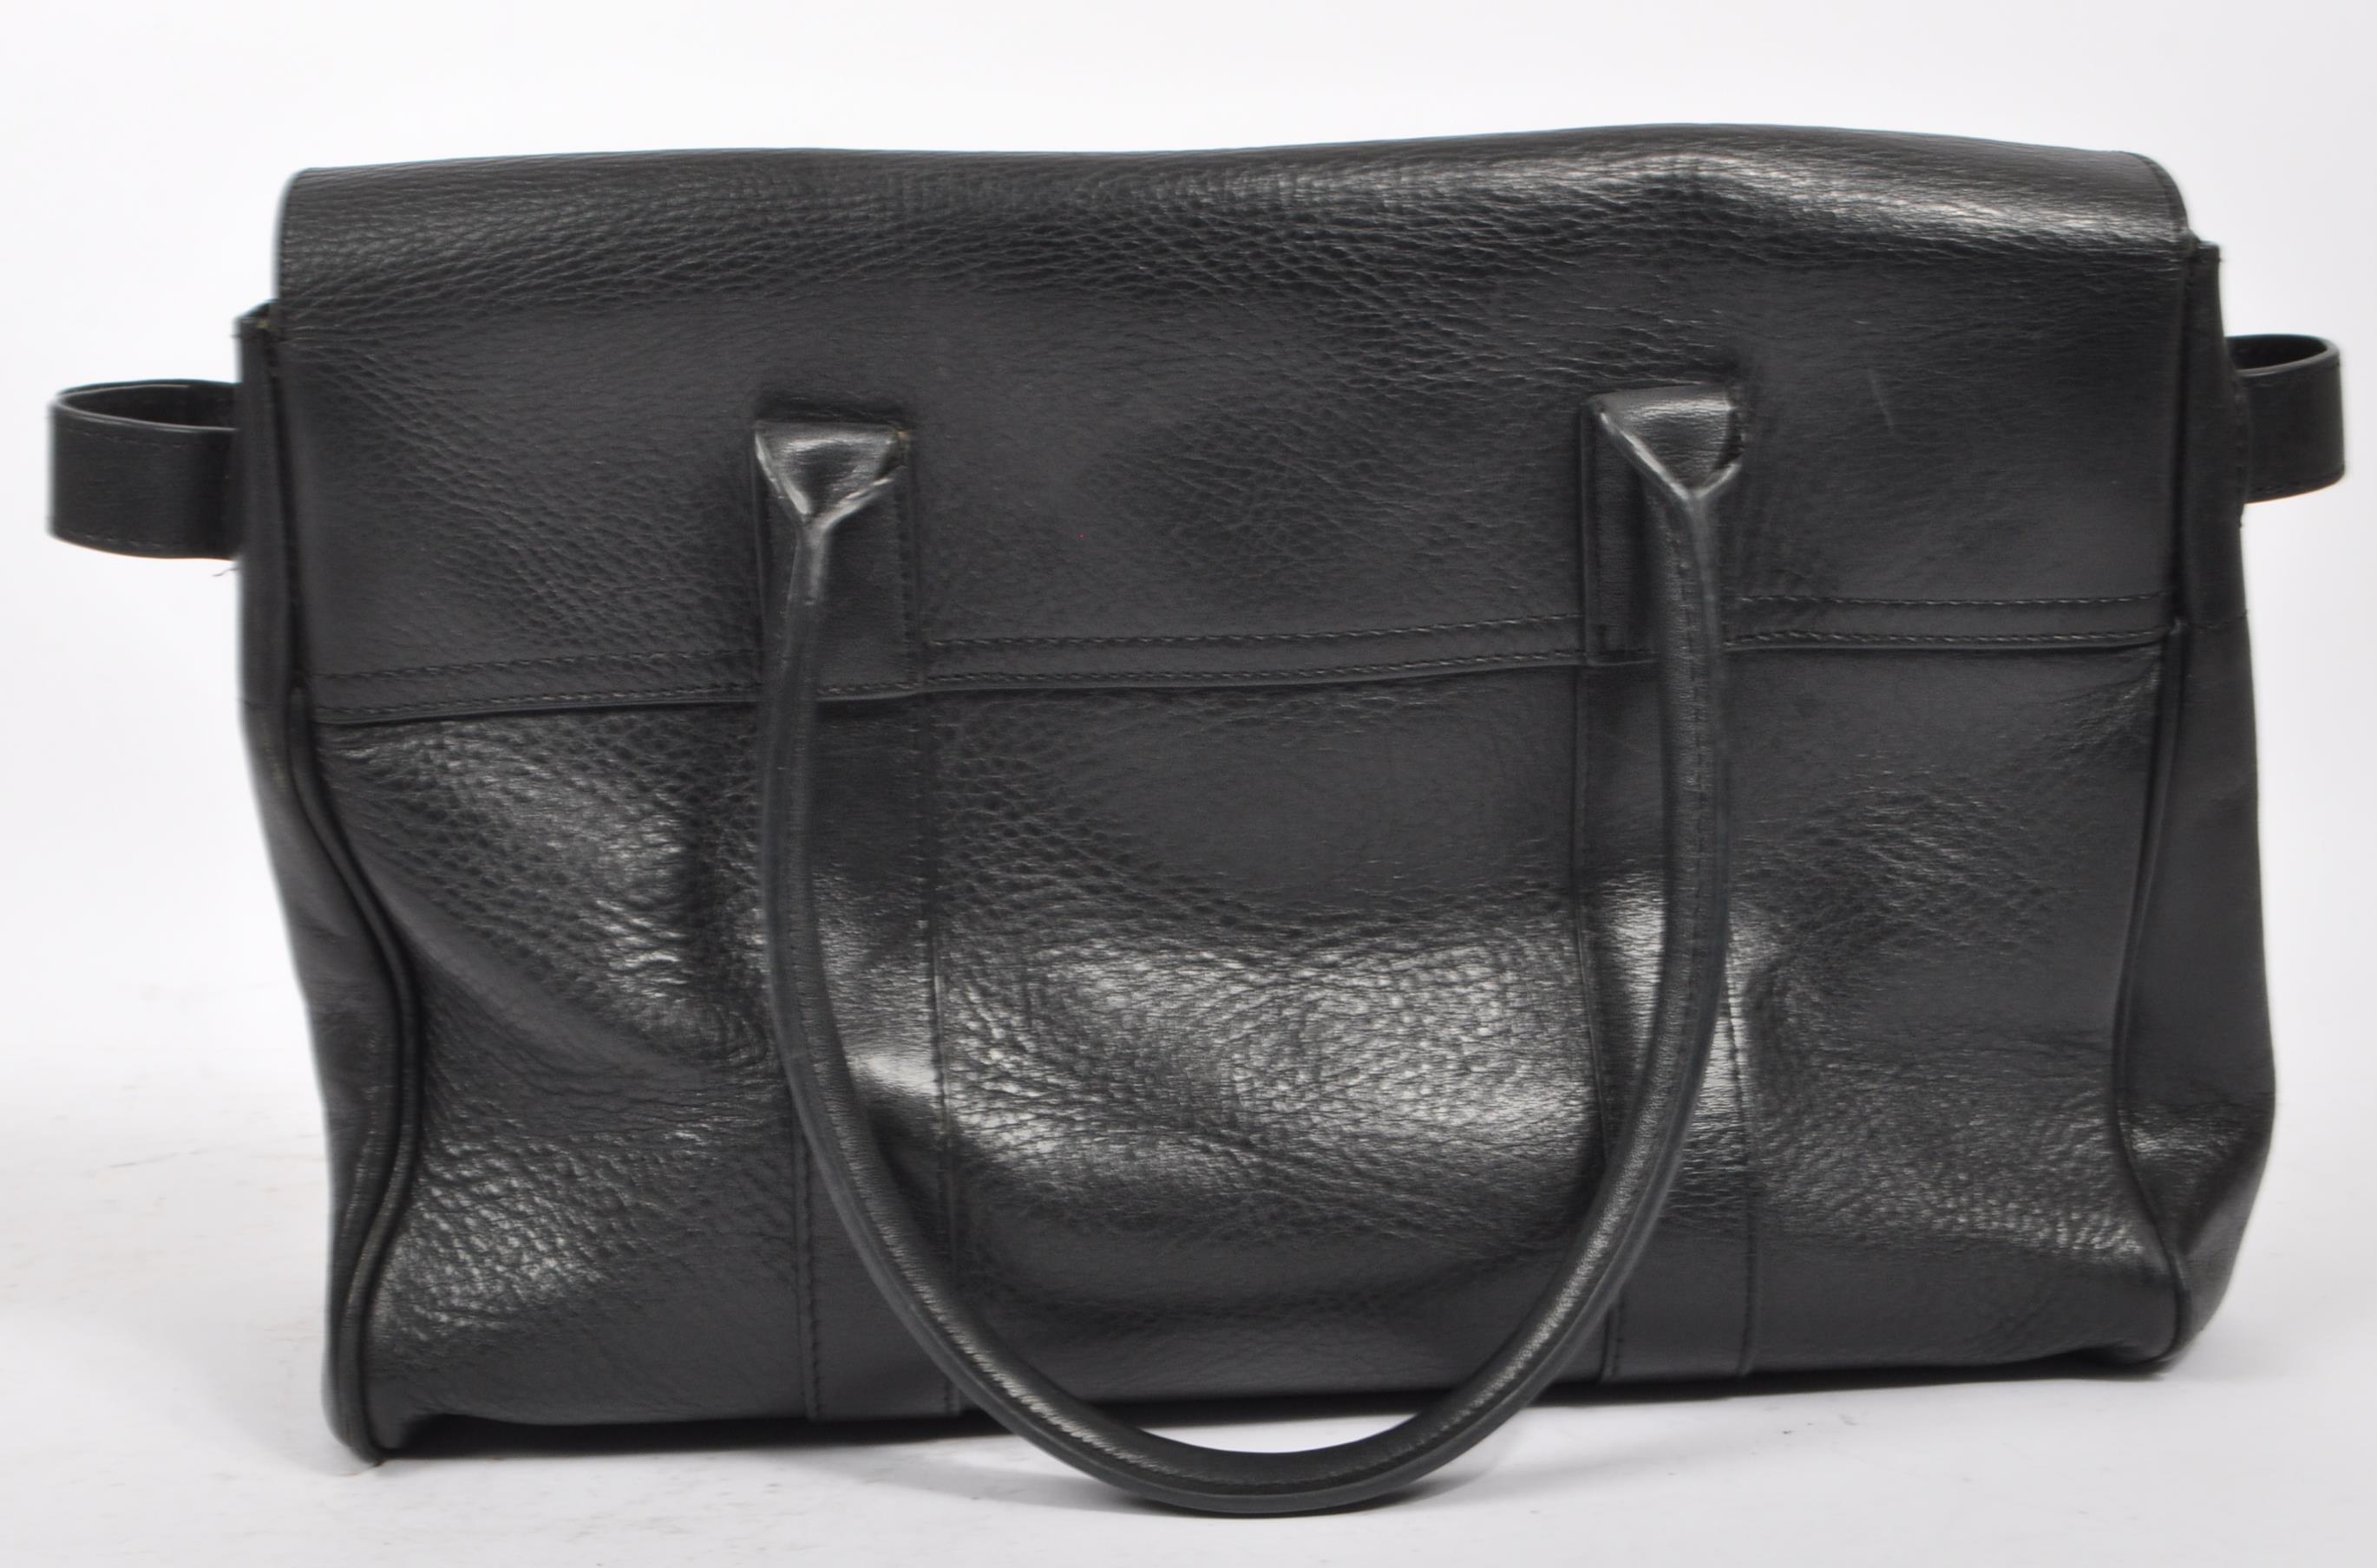 MULBERRY - CONTEMPORARY BAYSWATER LEATHER HANDBAG - Image 5 of 7